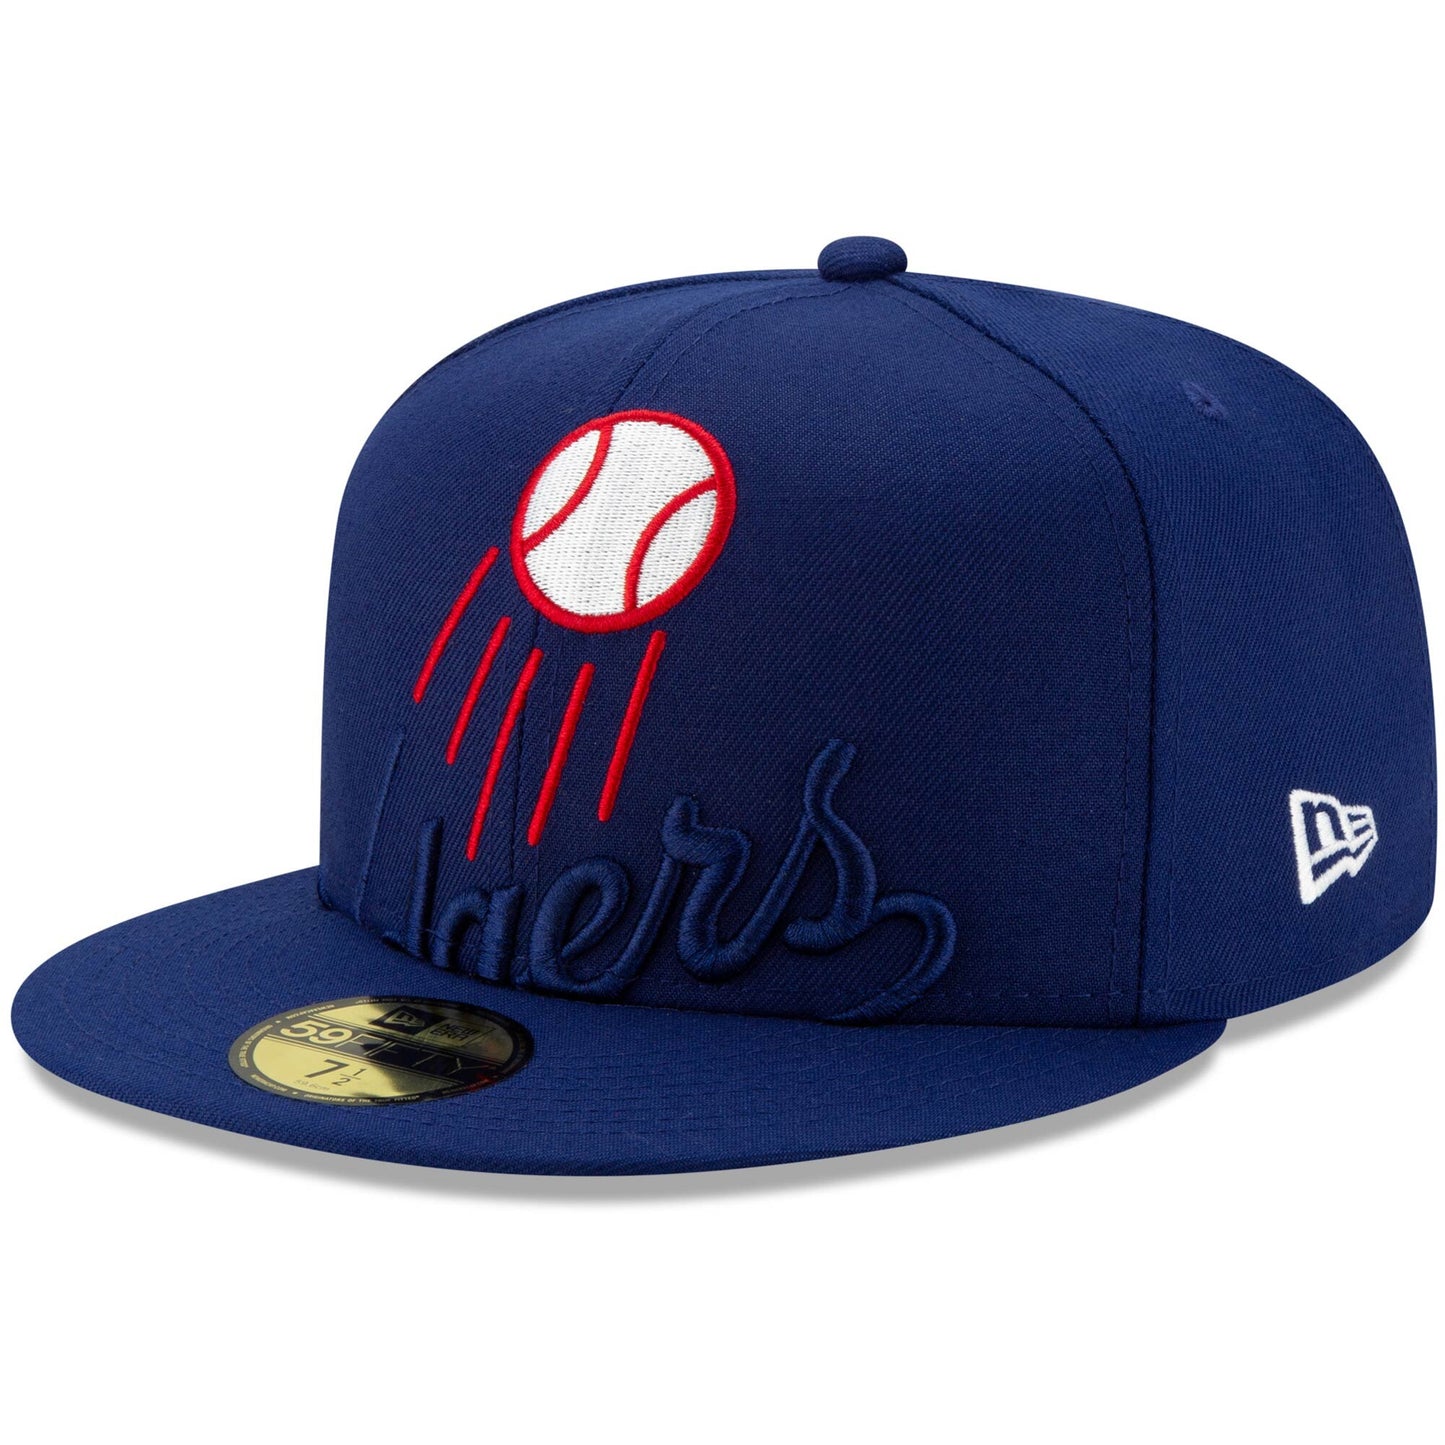 LOS ANGELES DODGERS LOGO ELEMENTS 5950 FITTED